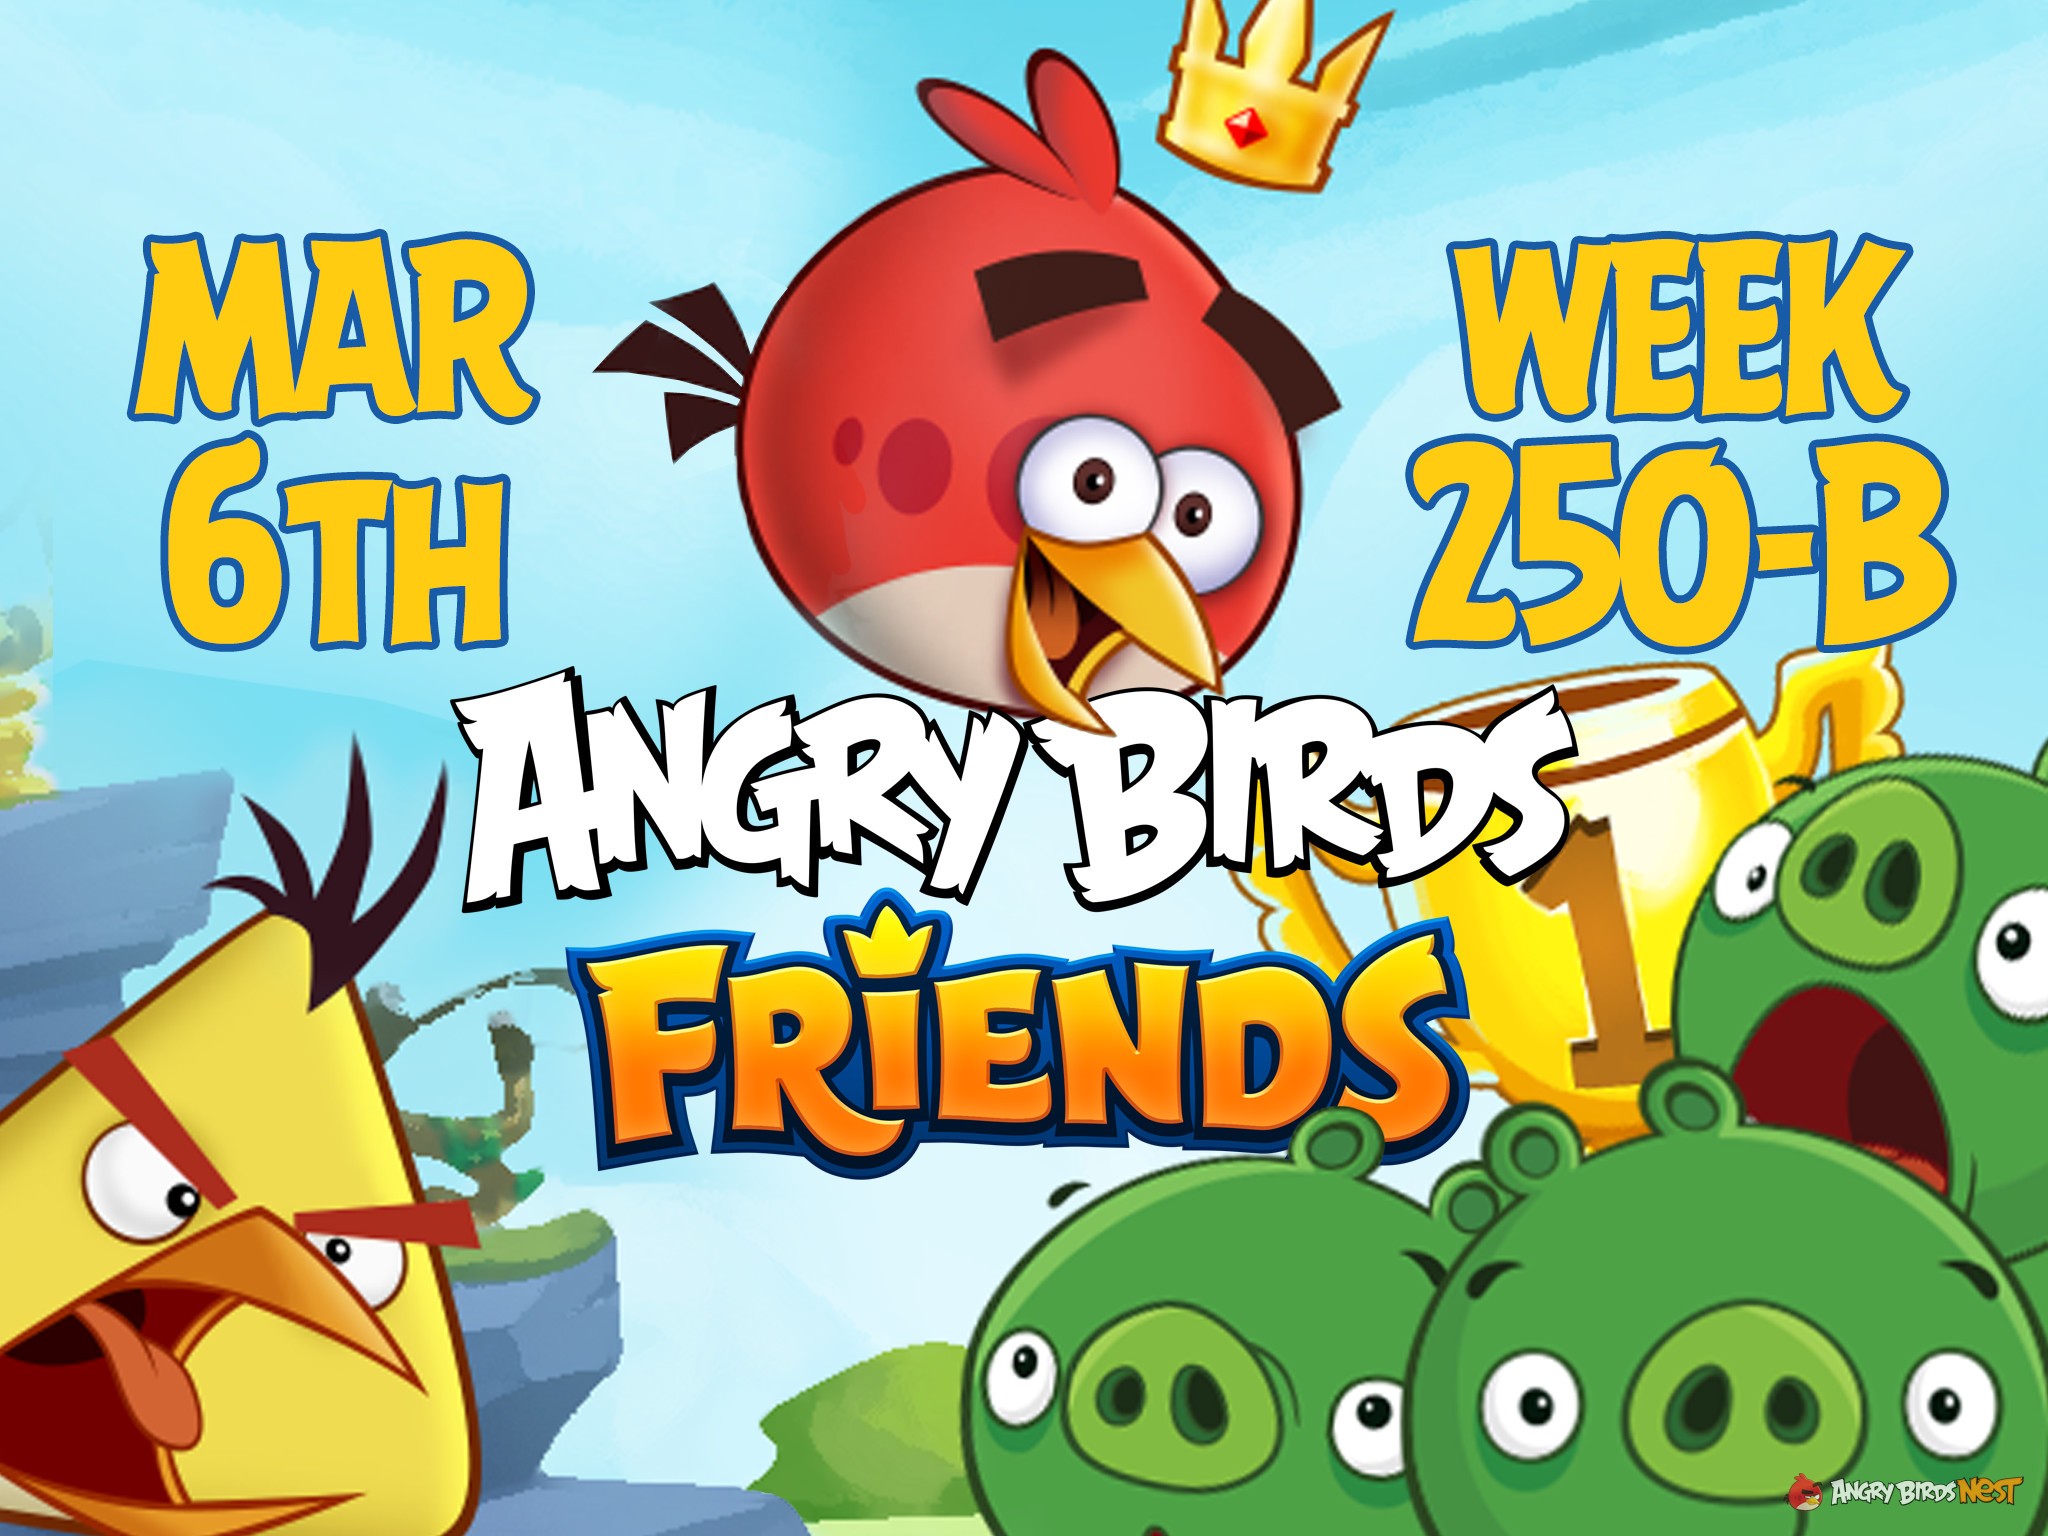 Angry Birds Friends Tournament Week 250-B Feature Image